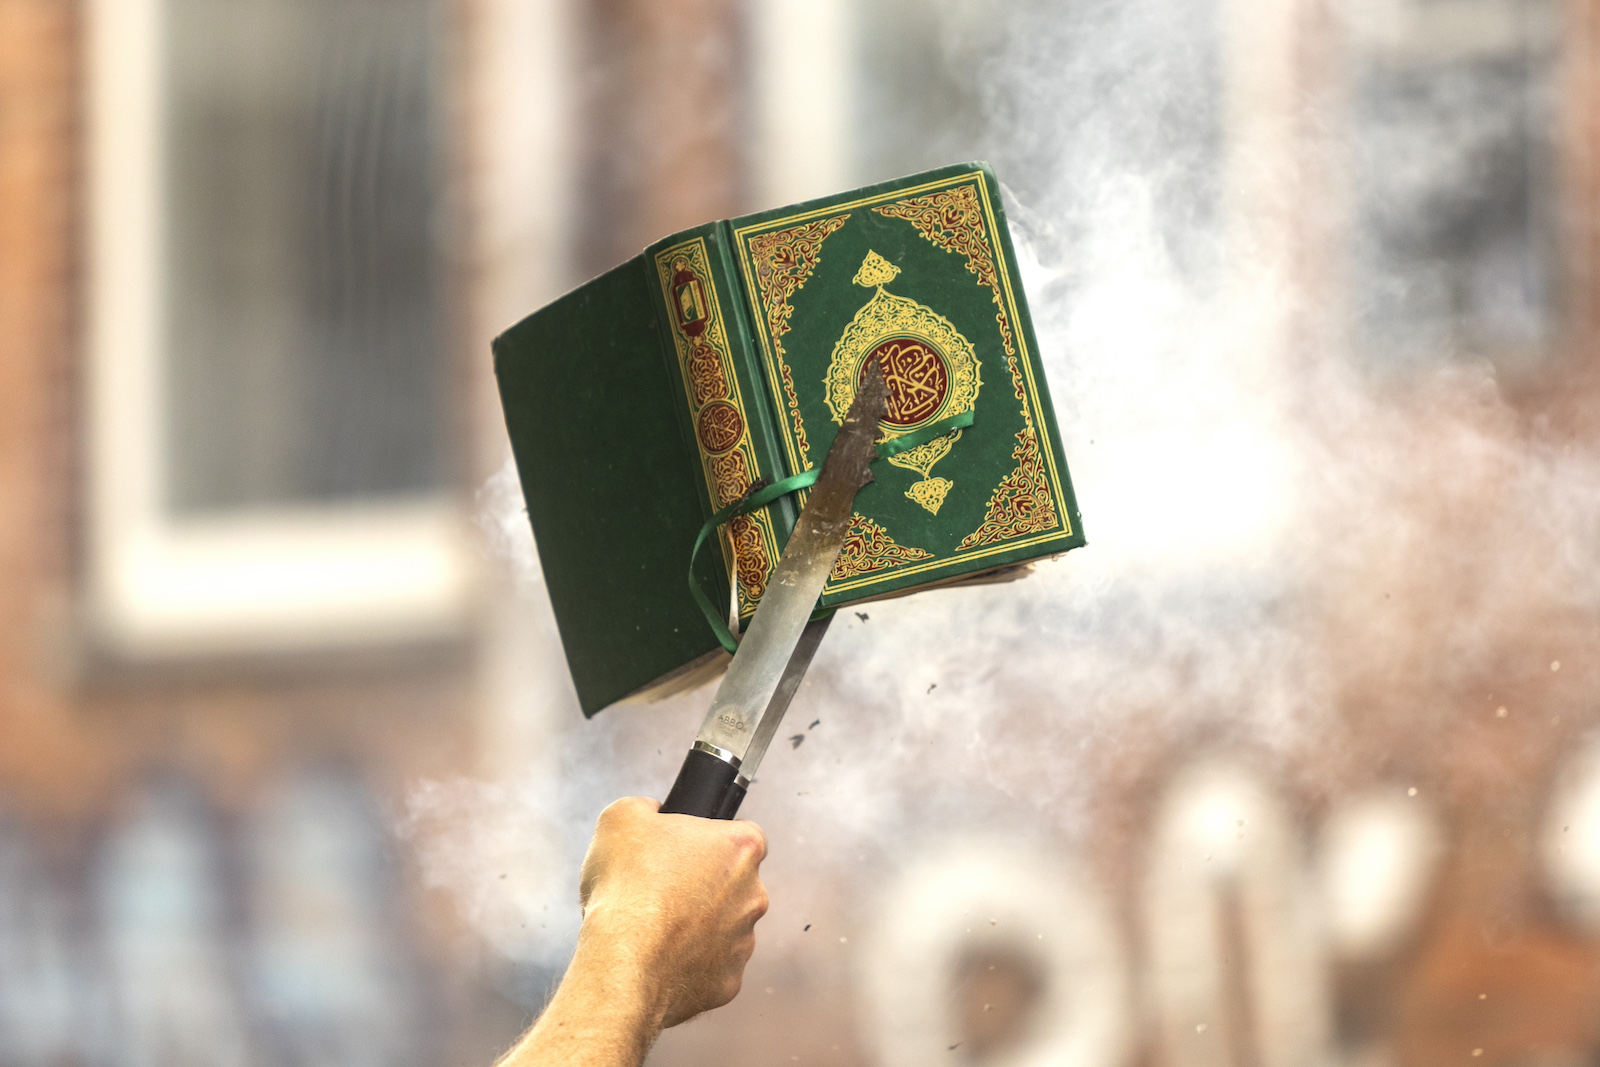 Denmark Has Made It Illegal To Burn The Quran In Public